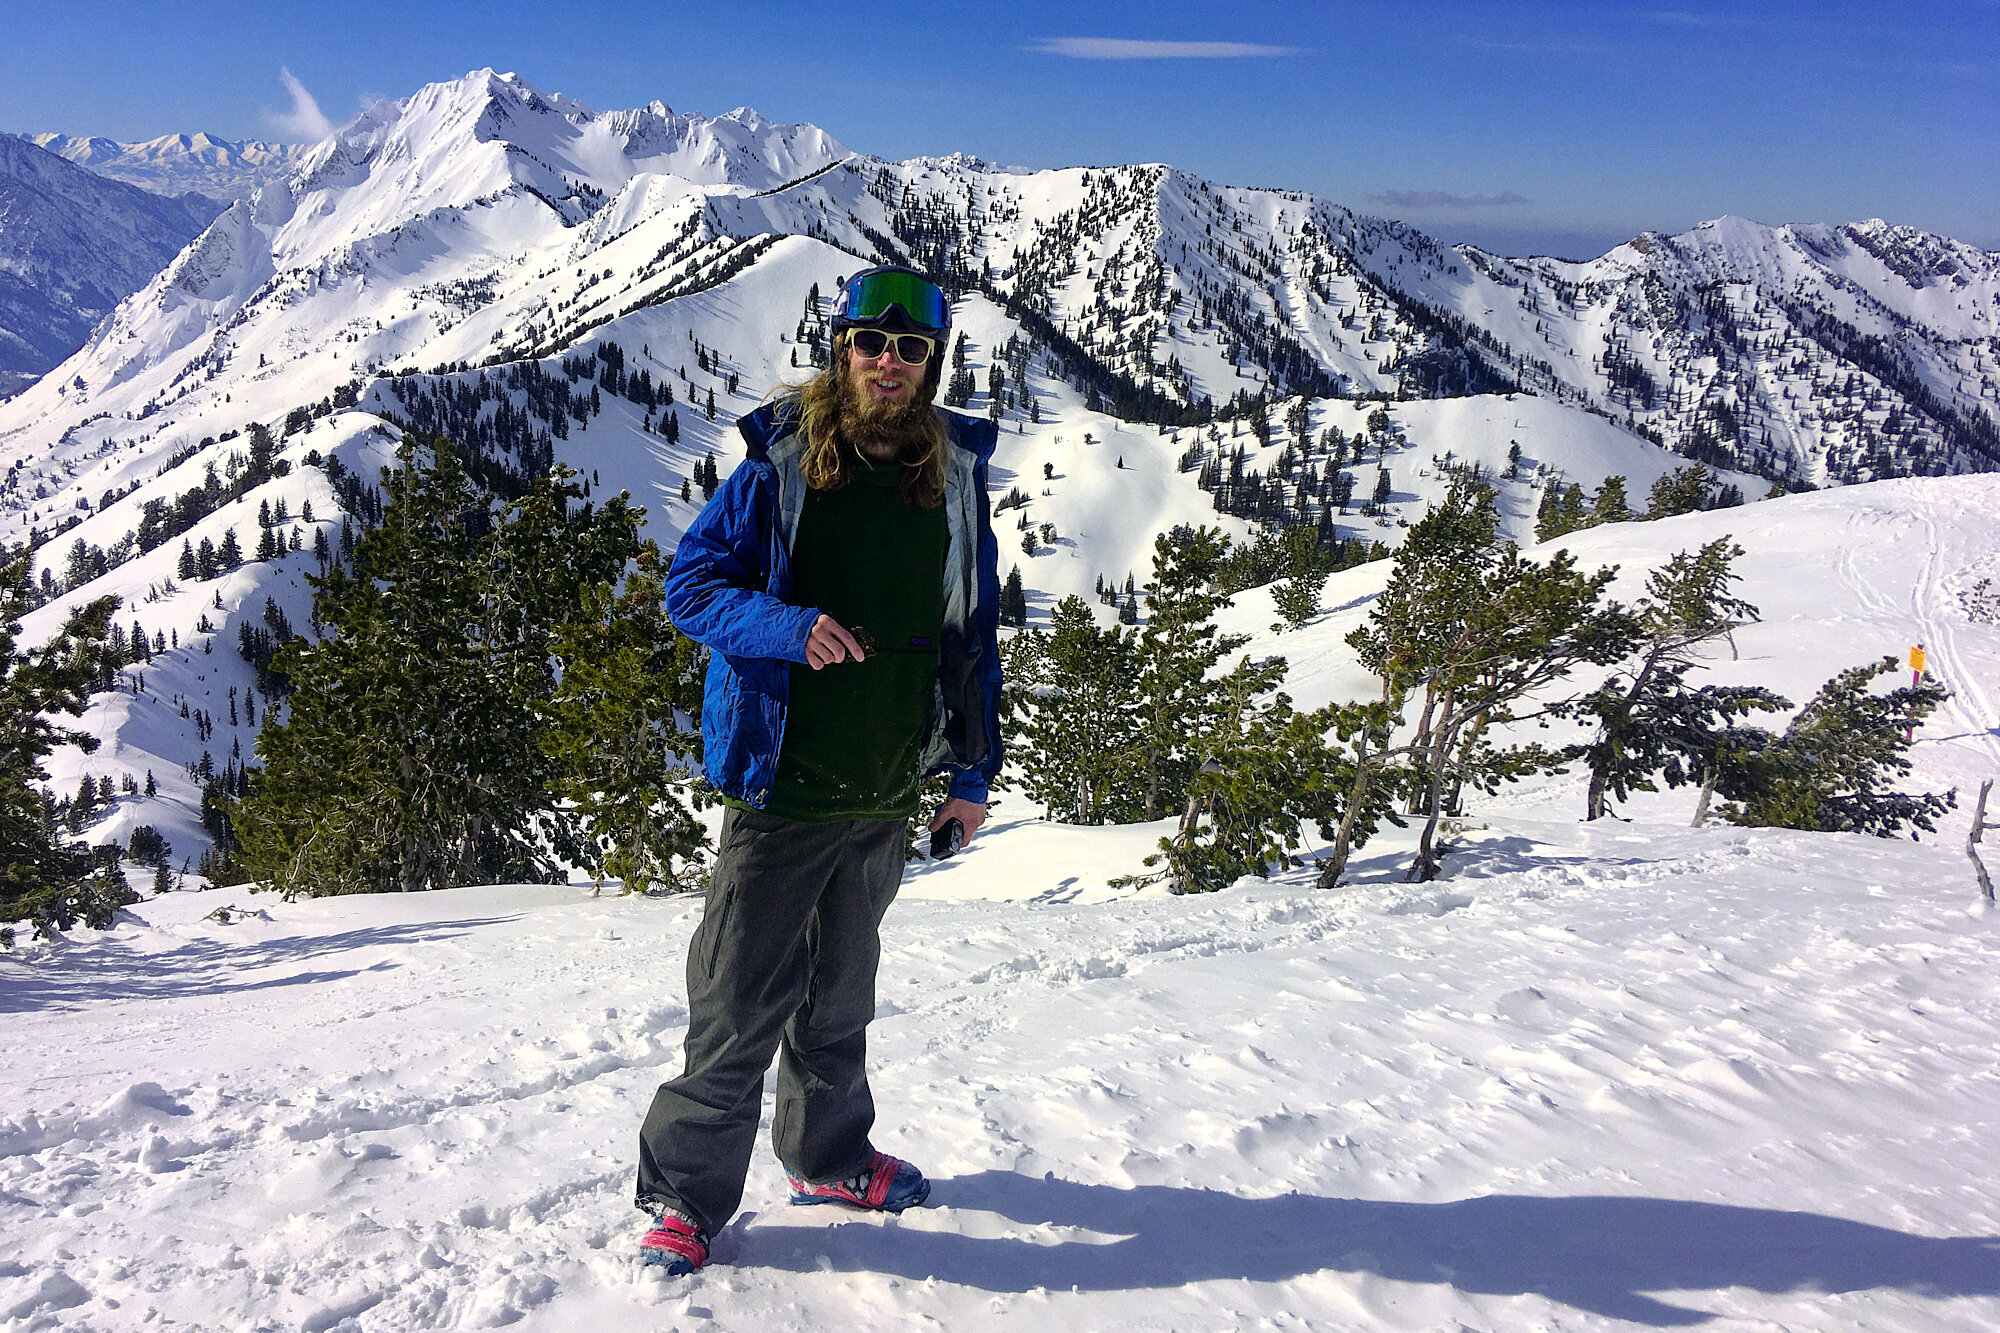  Myself atop Honeycomb Cliffs with Mt. Superior and Little Cottonwood Canyon in the background. | Big Cottonwood Canyon, UT 2/13/20 